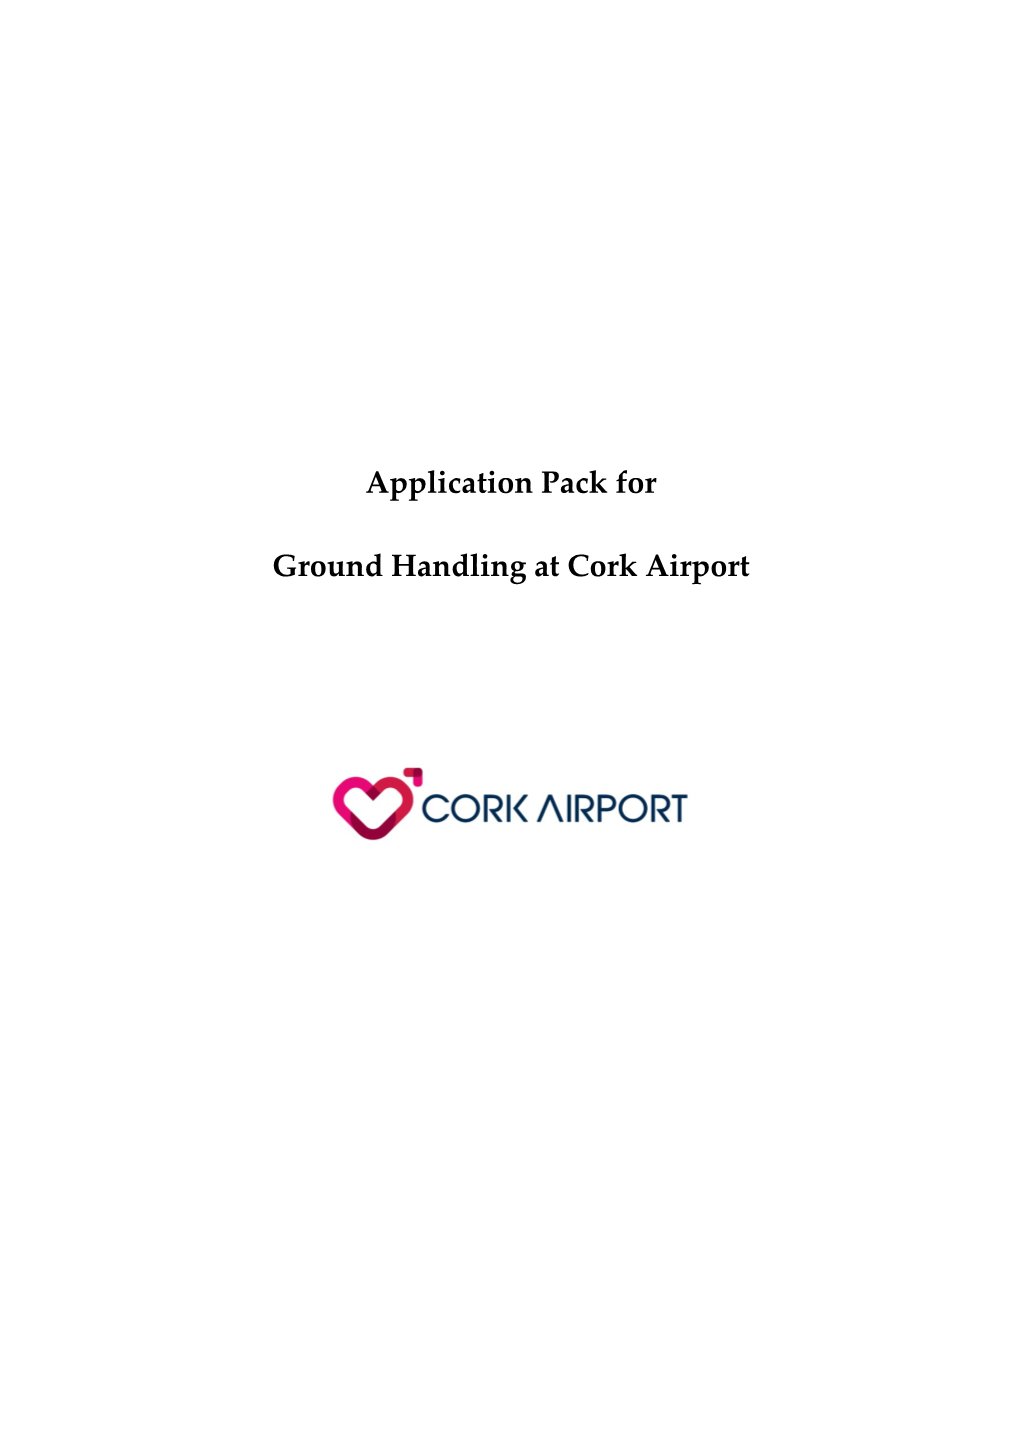 Application for Ground Handling at Cork Airport